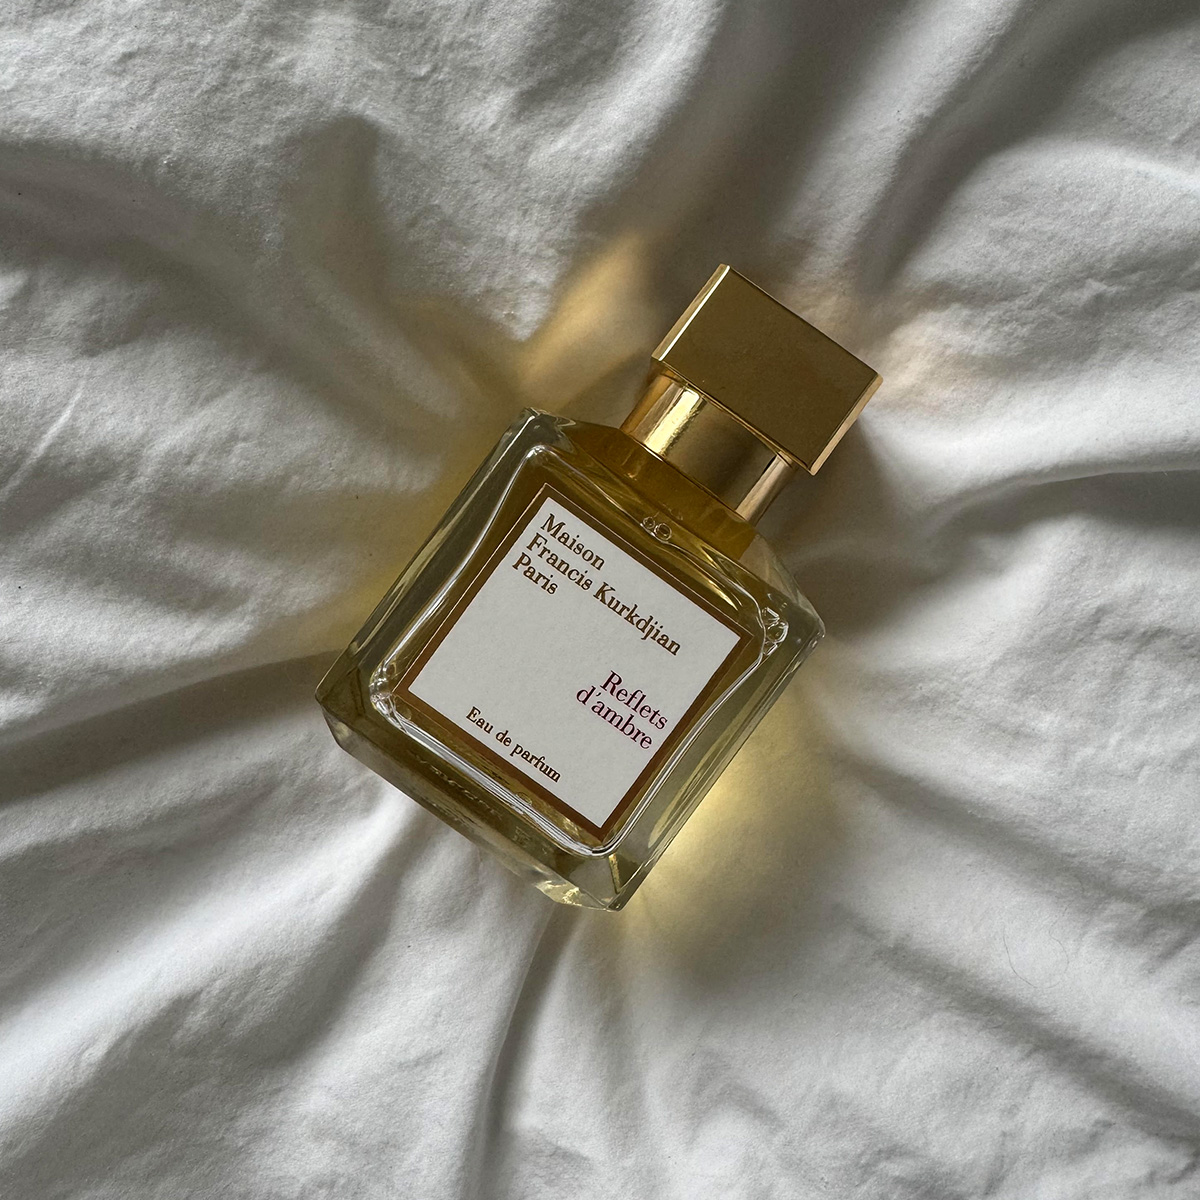 Does Maison Francis Kurkdjian's New Scent Live Up to Baccarat Rouge? I Have Thoughts